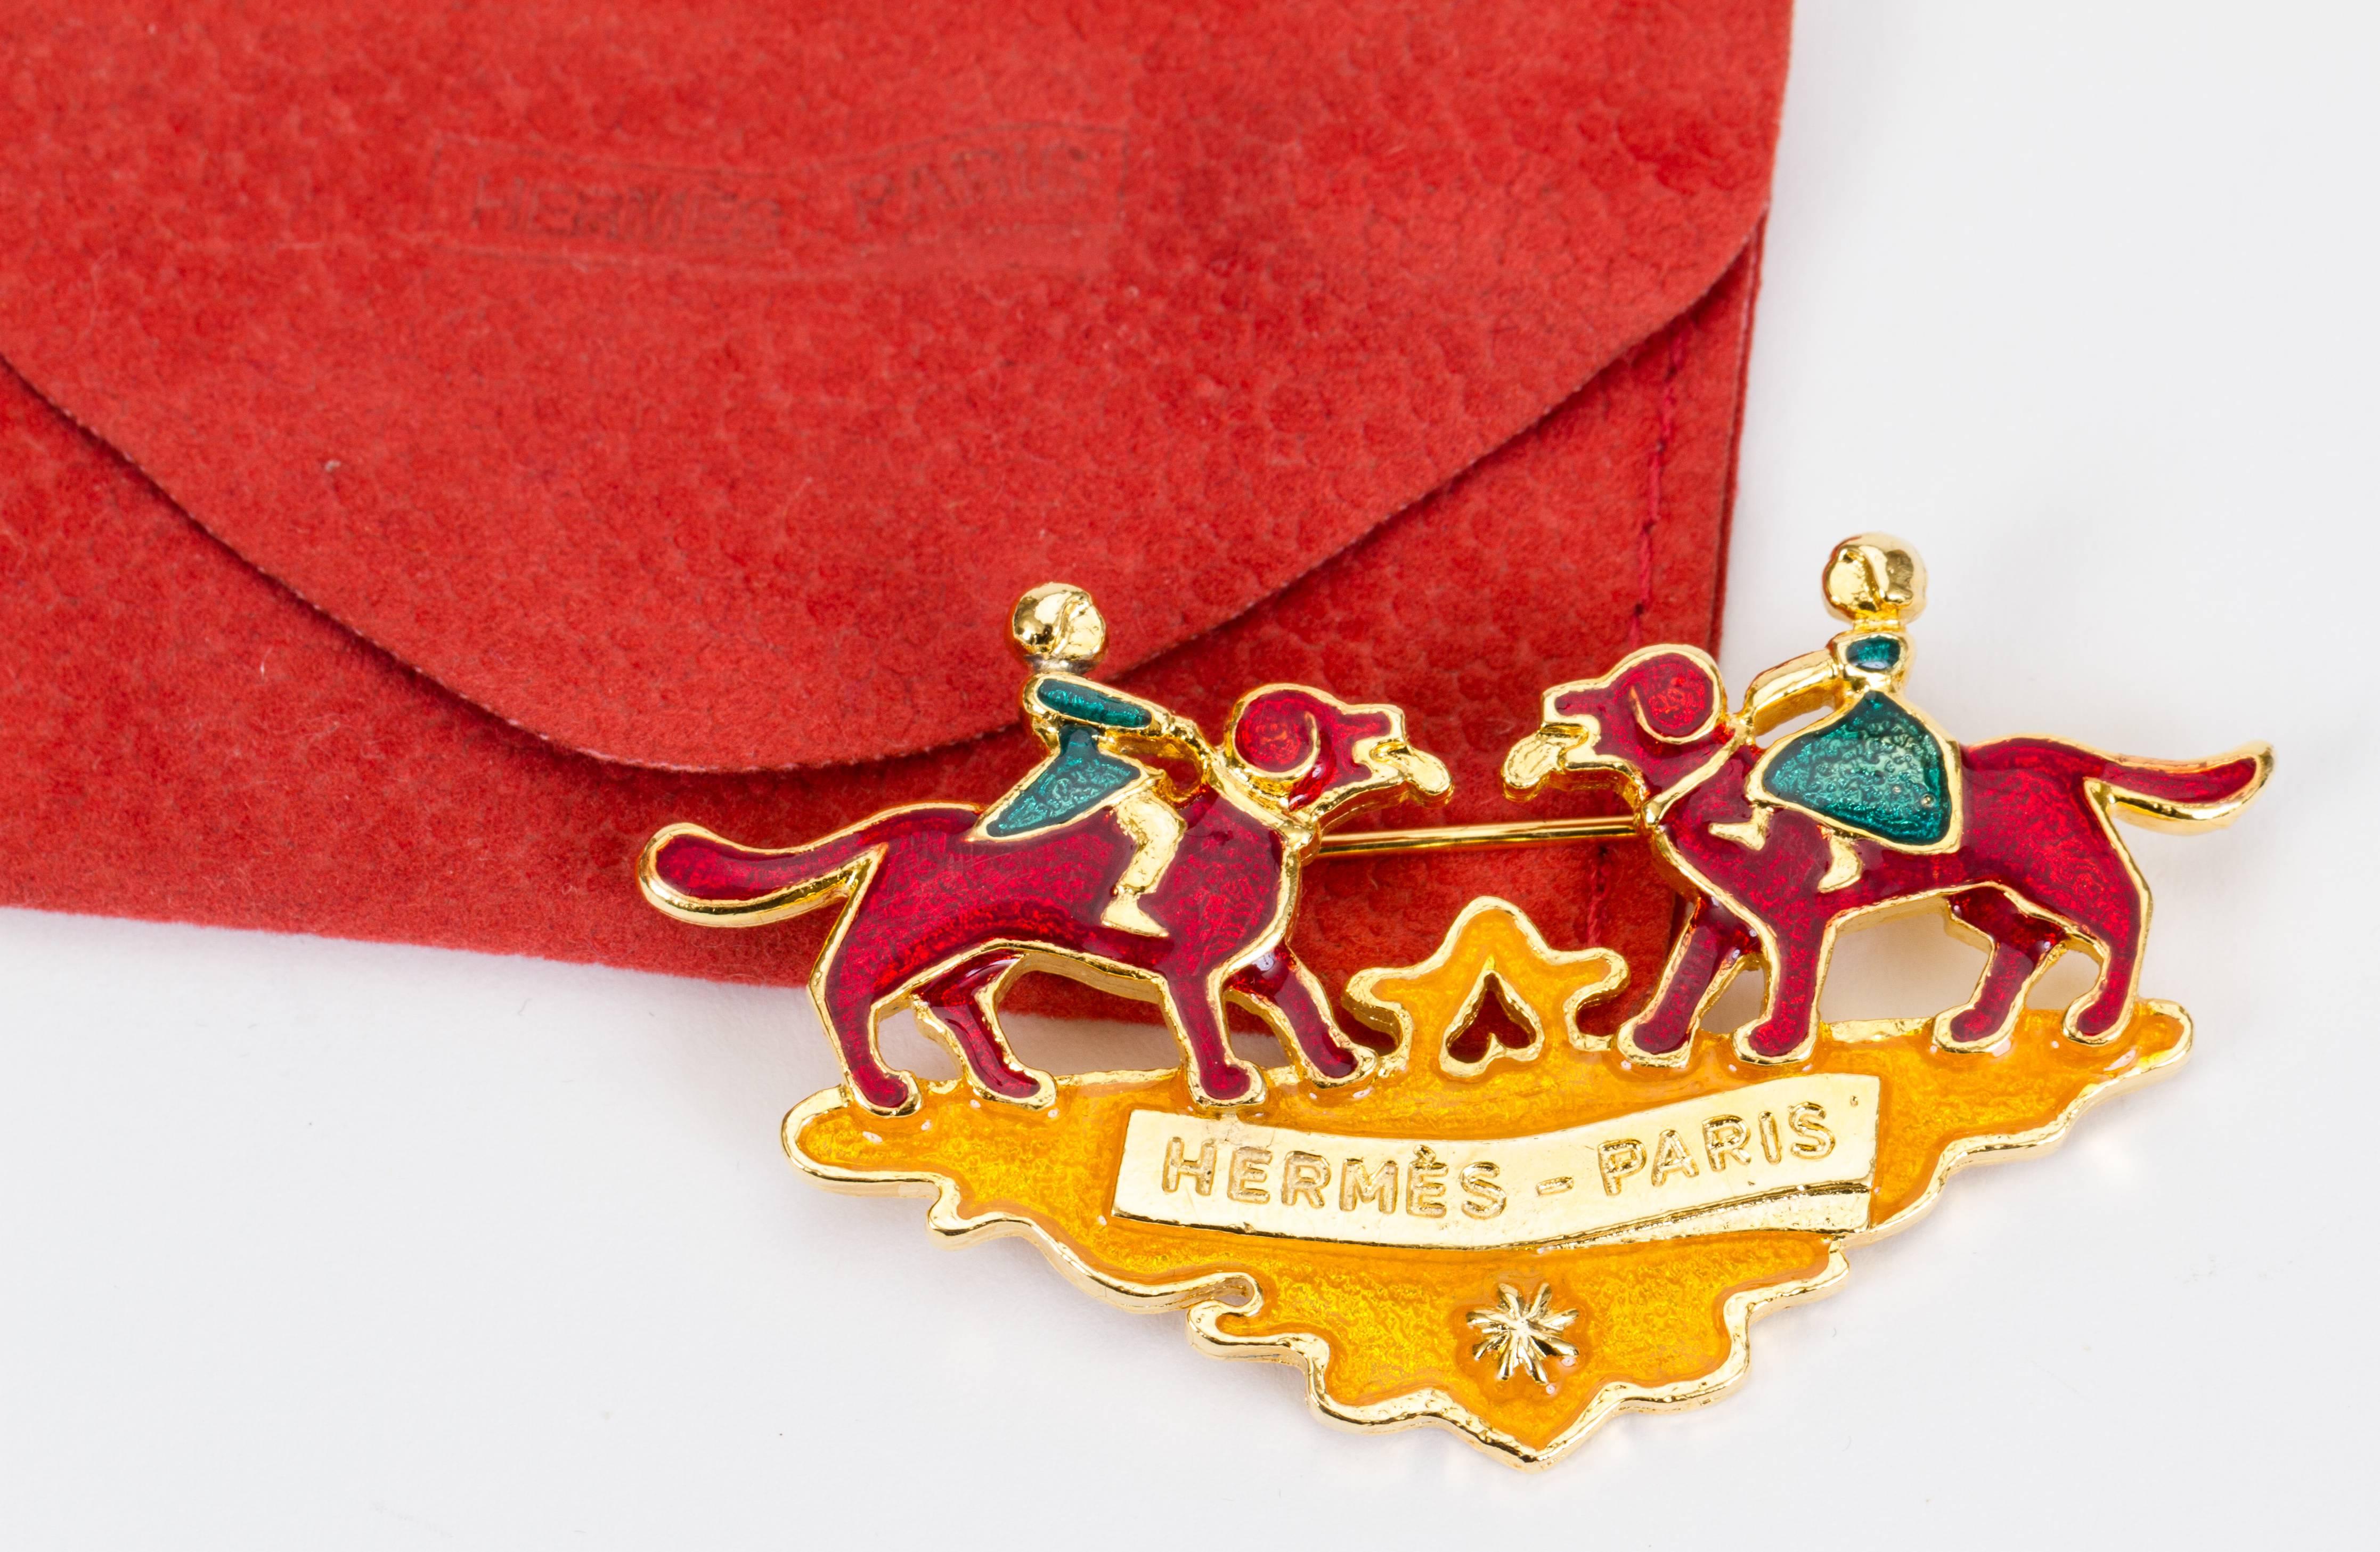 Hermes enamel multicolor enamel Christmas pin with gold tone plating. Comes with red suede pouch.